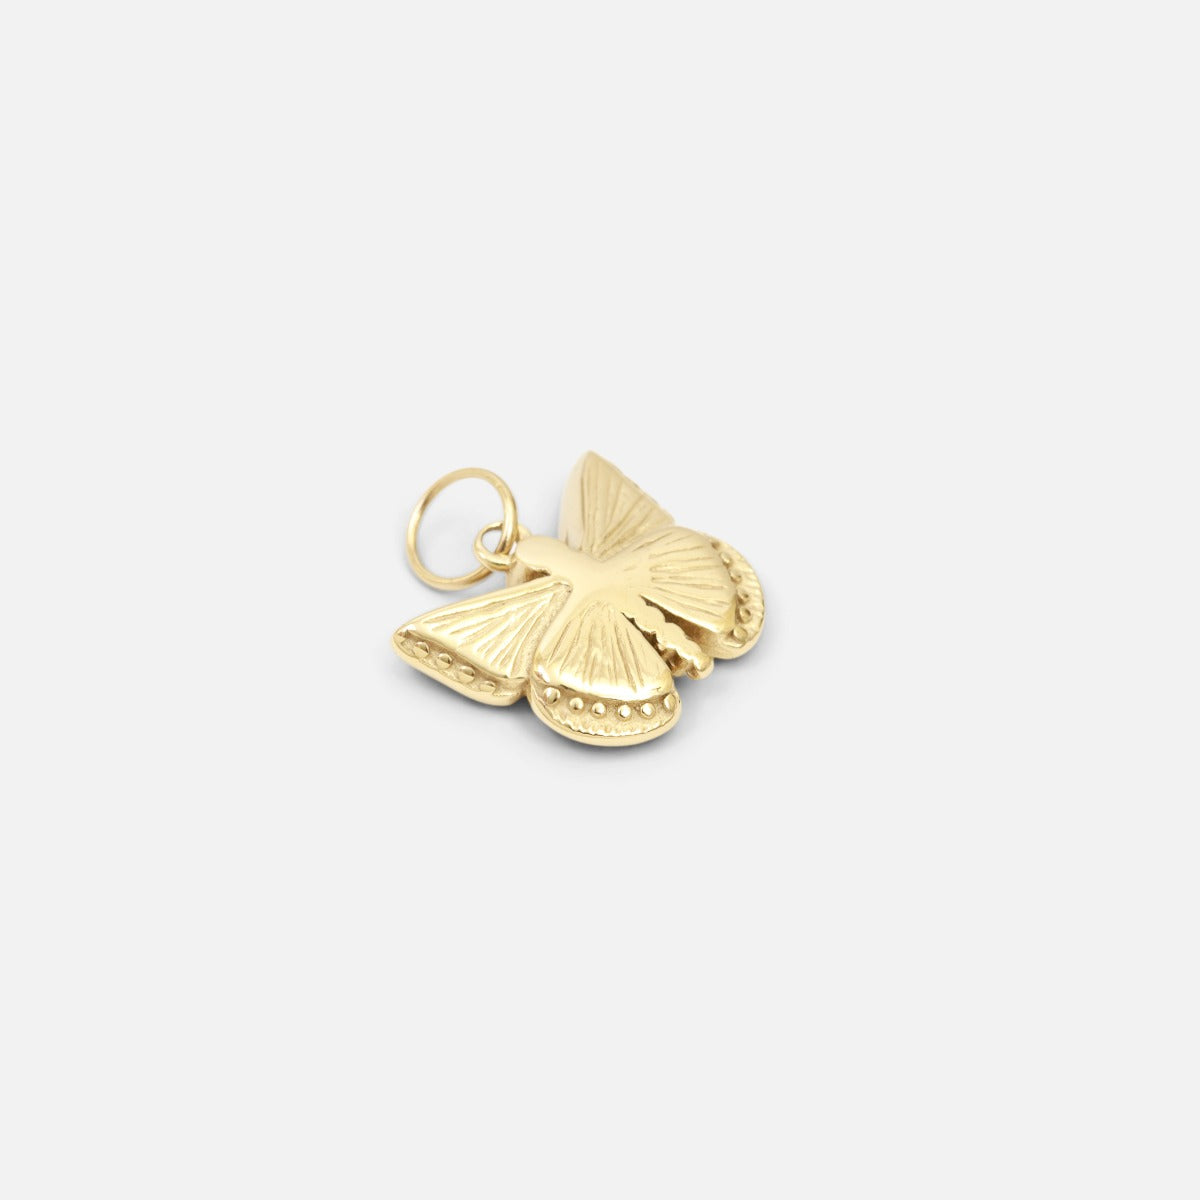 Small golden butterfly charm